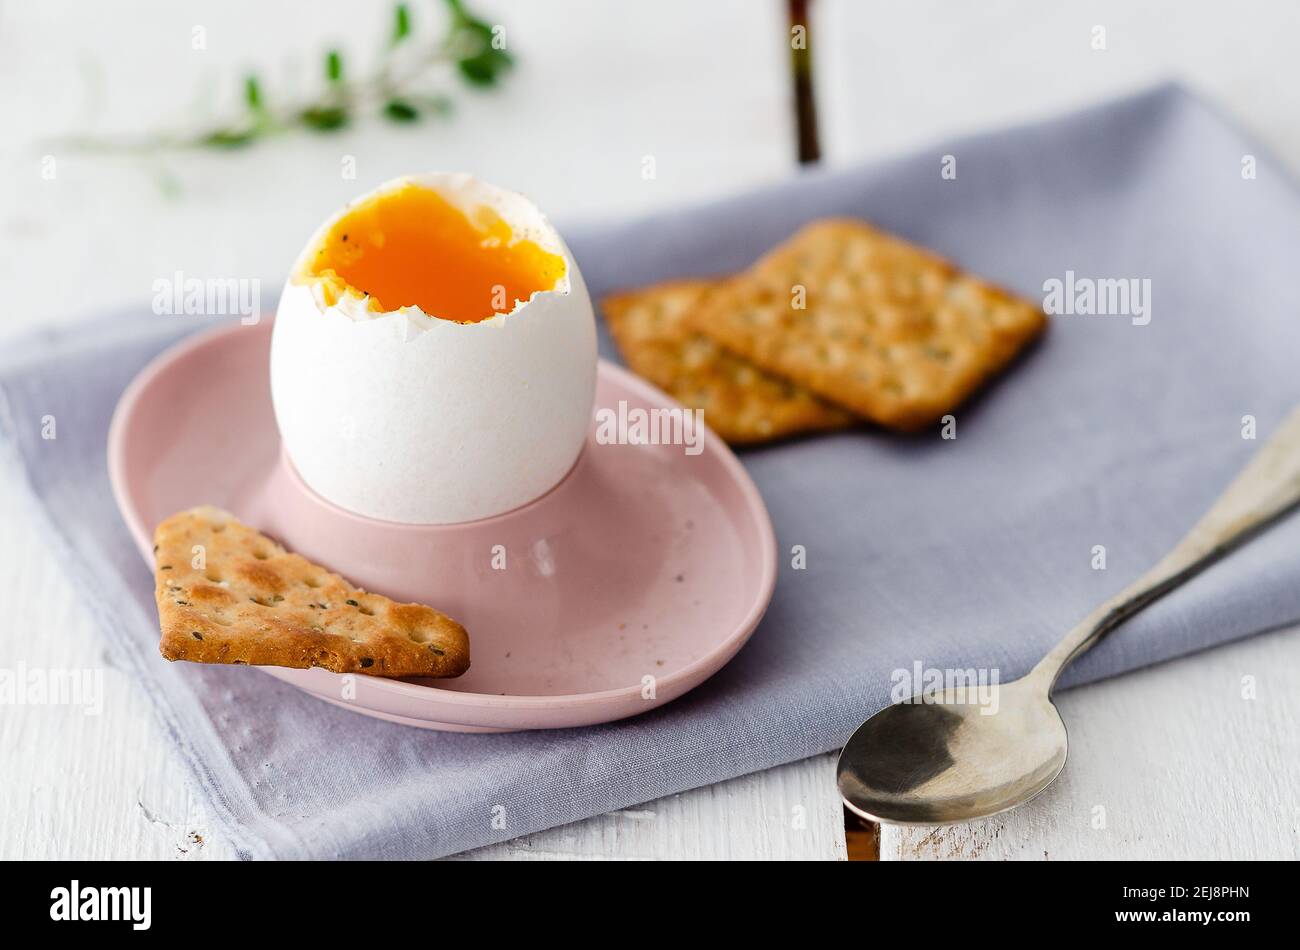 https://c8.alamy.com/comp/2EJ8PHN/soft-boiled-egg-in-a-pink-egg-cup-with-a-spoon-a-light-blue-napkin-seed-crackers-and-oregano-leaves-in-white-wooden-backdrop-2EJ8PHN.jpg